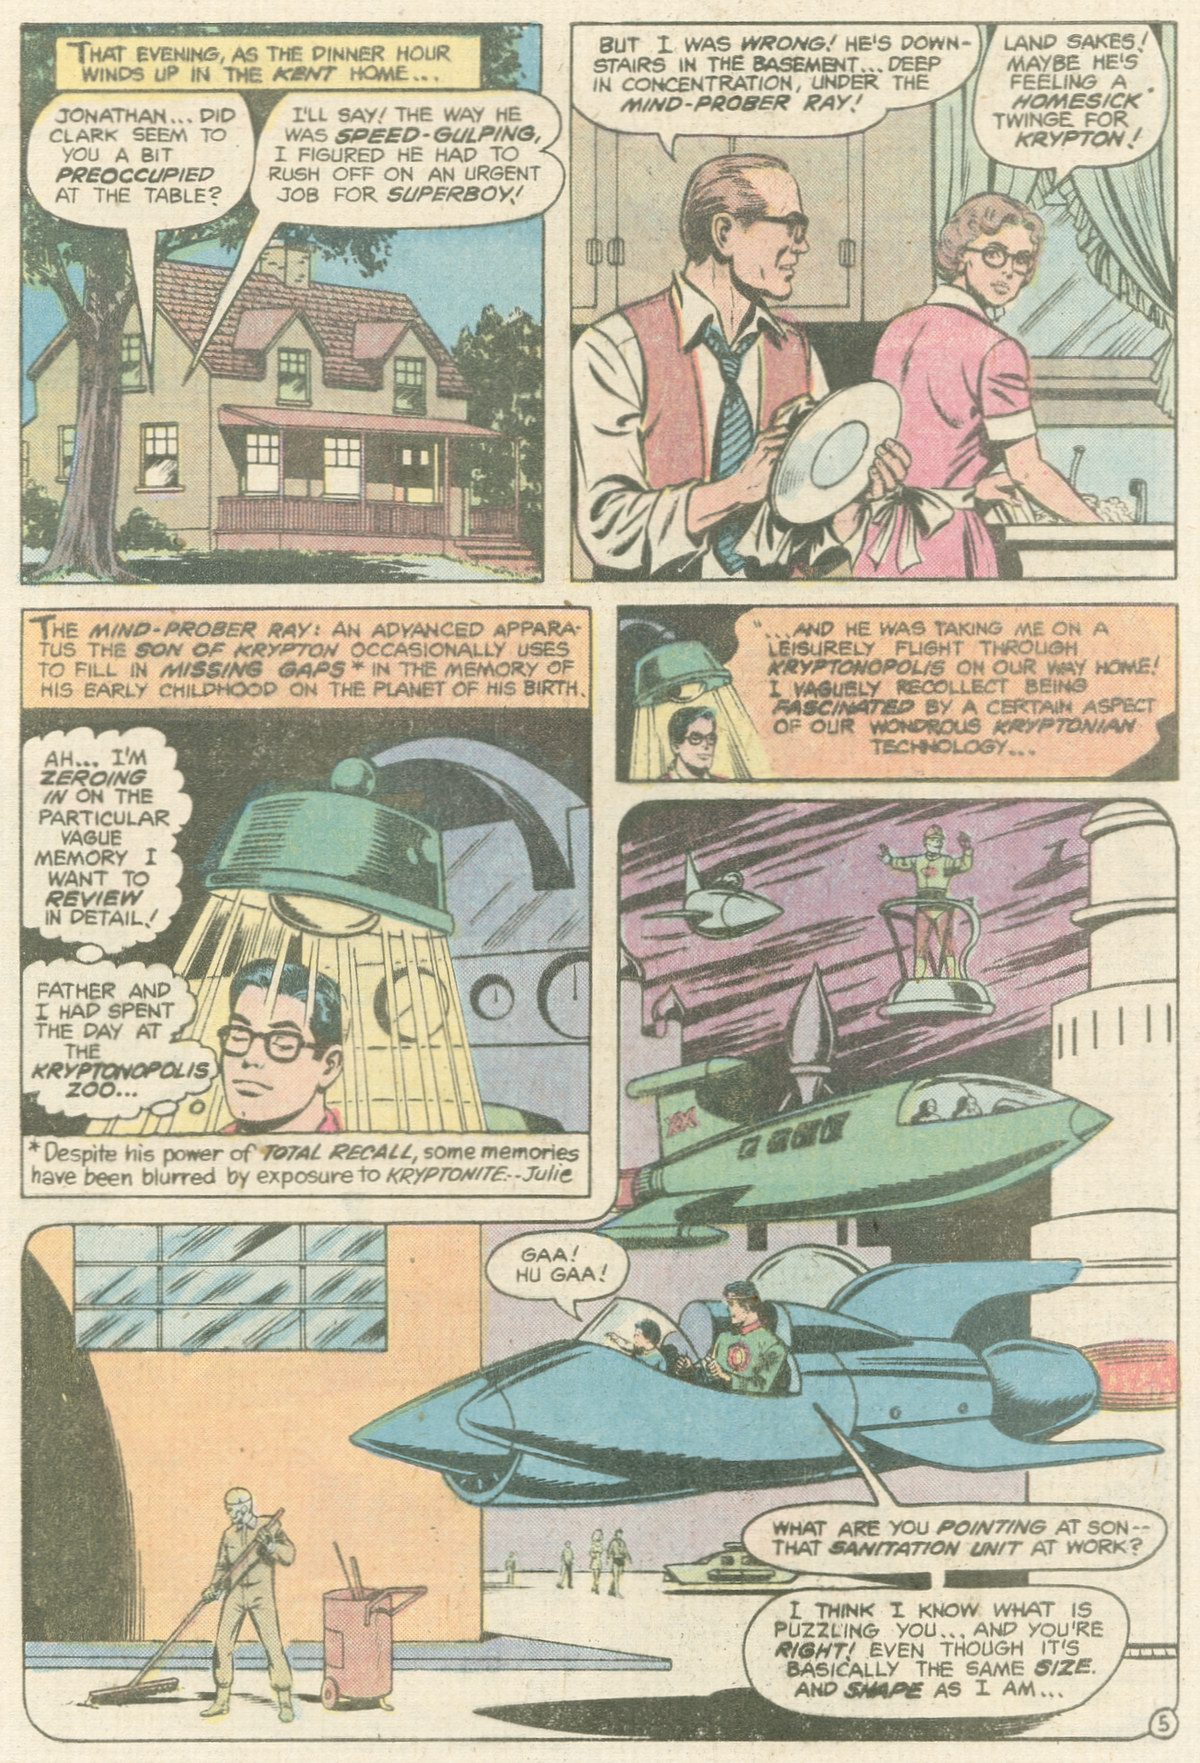 The New Adventures of Superboy 17 Page 5